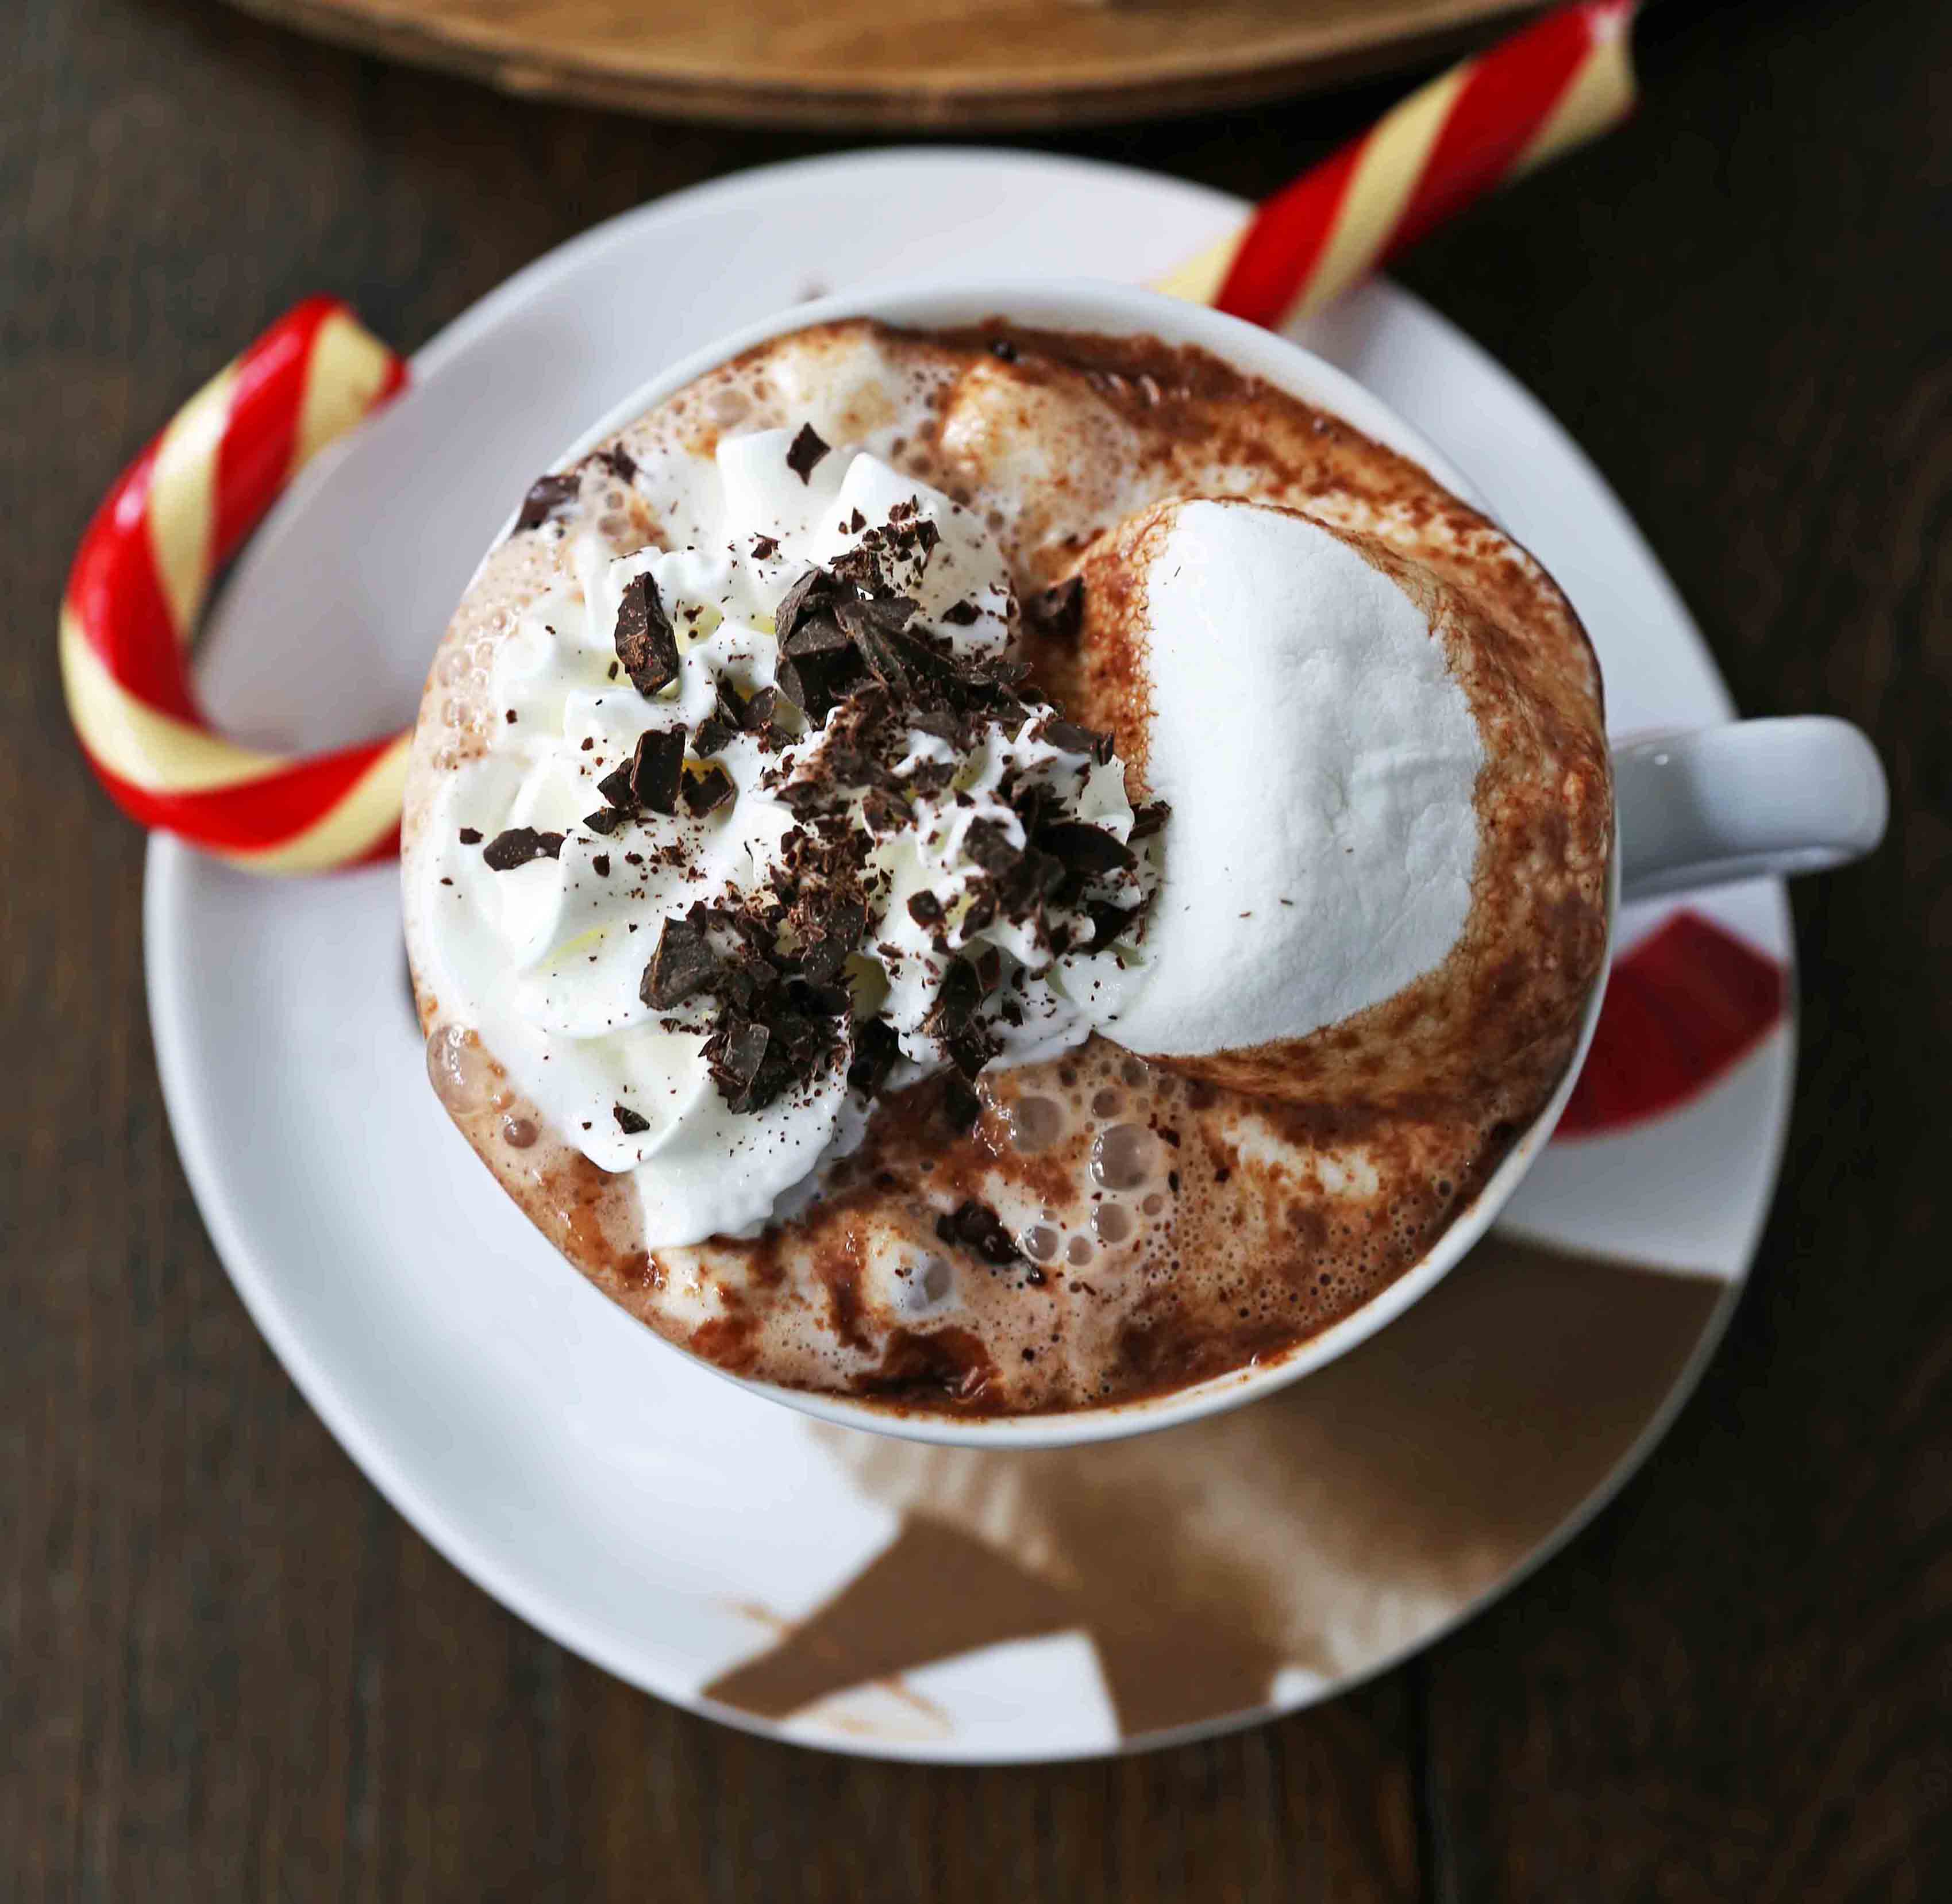 Homemade Hot Chocolate Recipe. How to make easy 5-ingredient gourmet hot chocolate. This Slow Cooker Hot Chocolate is perfect to serve at parties. A list of hot chocolate toppings ideas to make your very own Hot Chocolate Bar. www.modernhoney.com #hotchocolate #homemadehotchocolate #chocolate #hotchocolatebar #hotchocolatetoppings #christmas